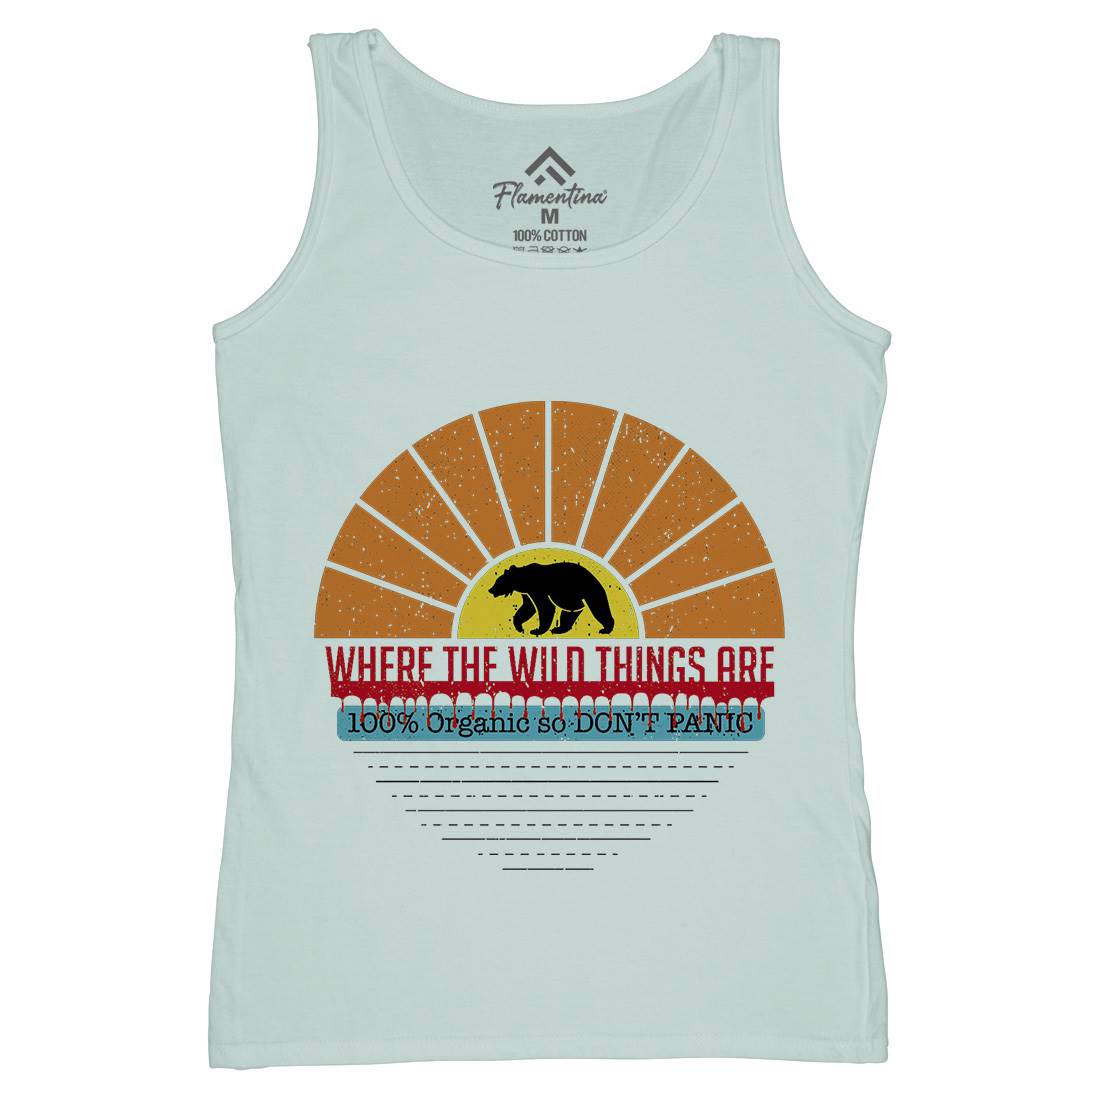 Where The Wild Things Are Womens Organic Tank Top Vest Nature A941